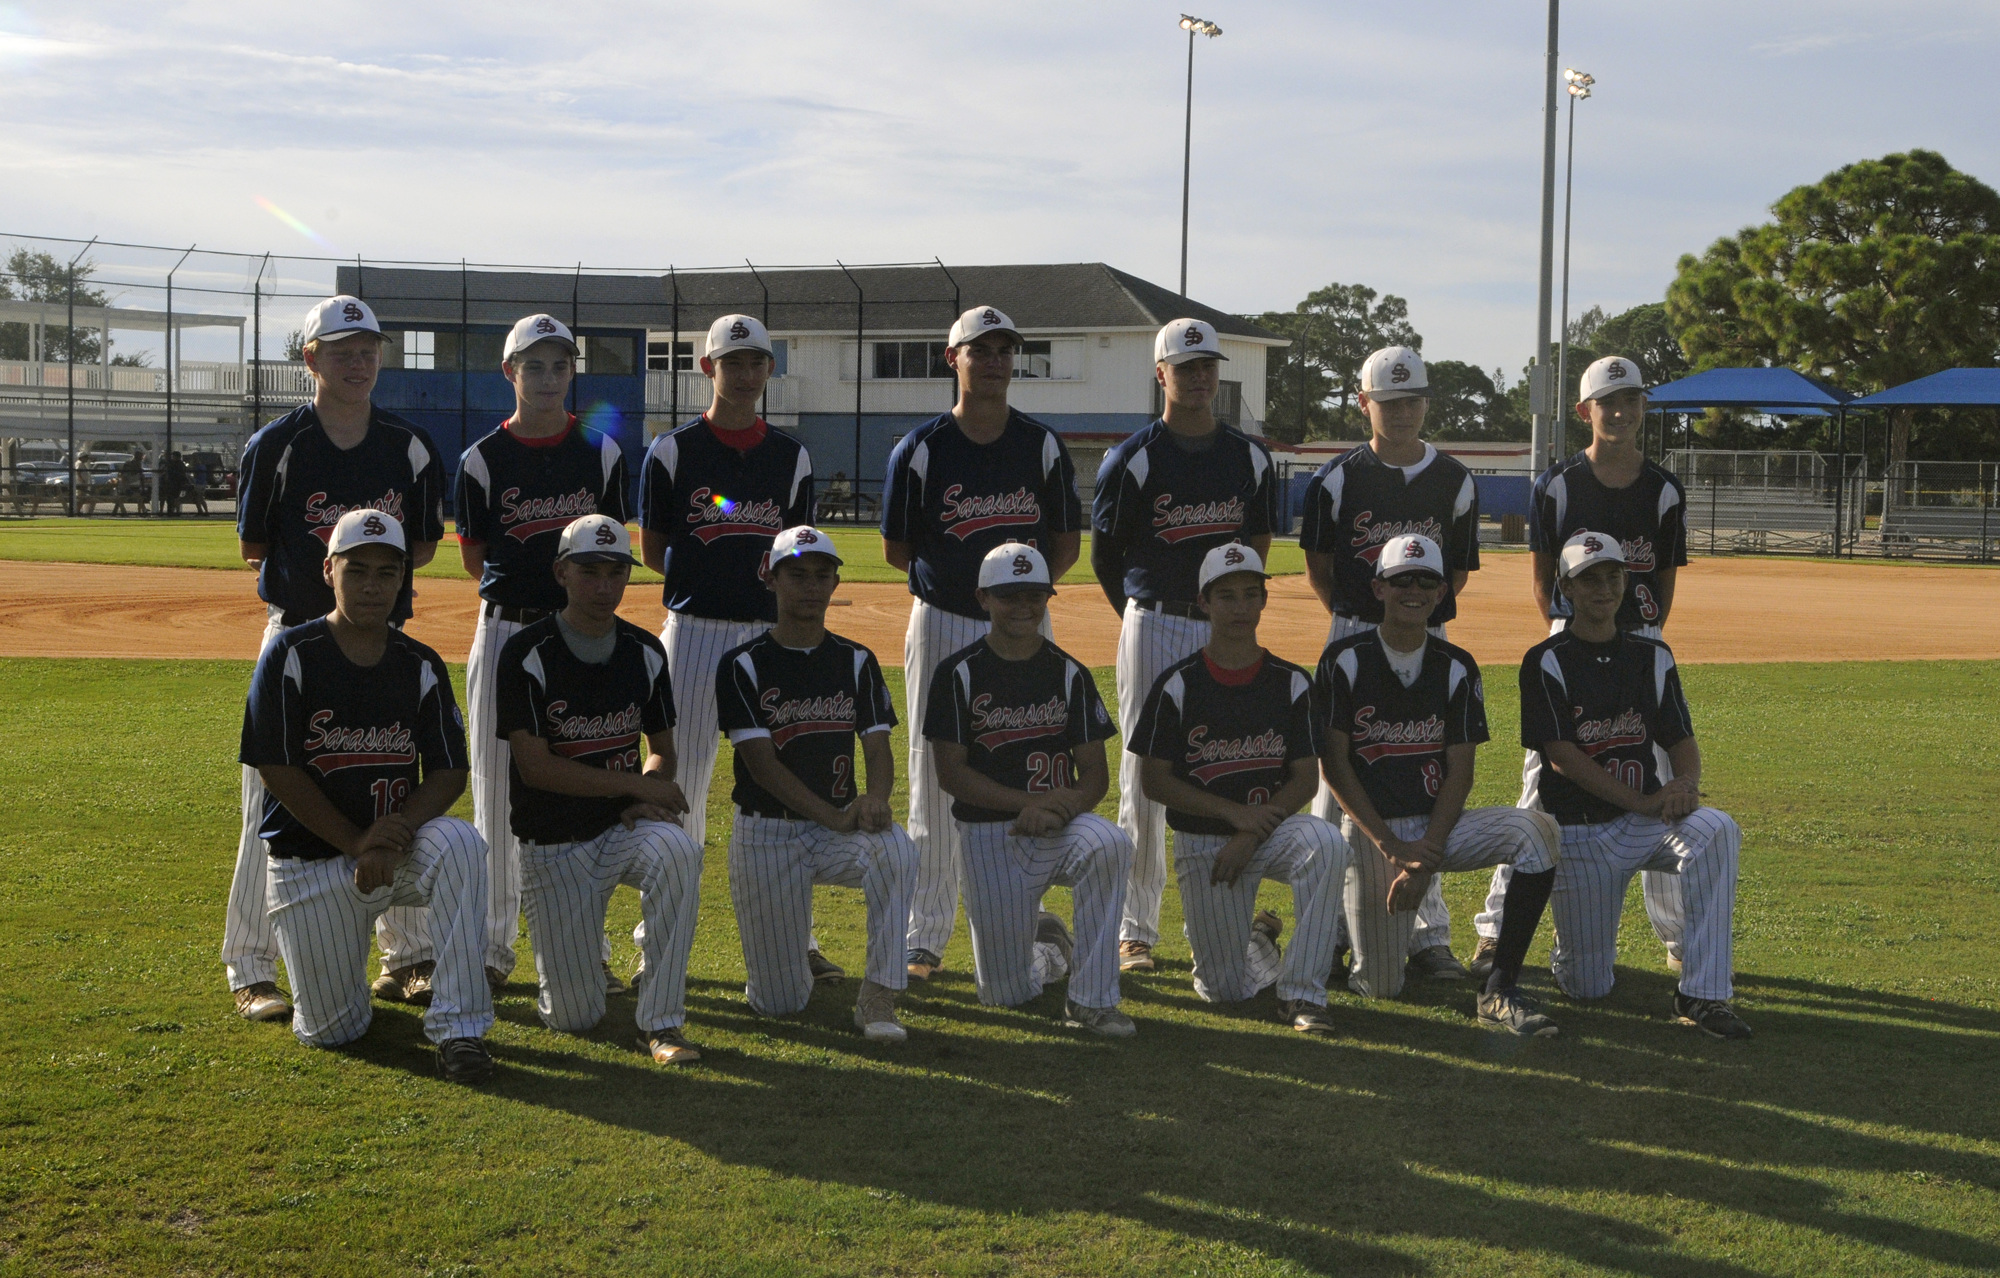 The Sarasota Babe Ruth 14U All-Stars will travel to Westfield, Mass. for the World Series Aug. 11-18.